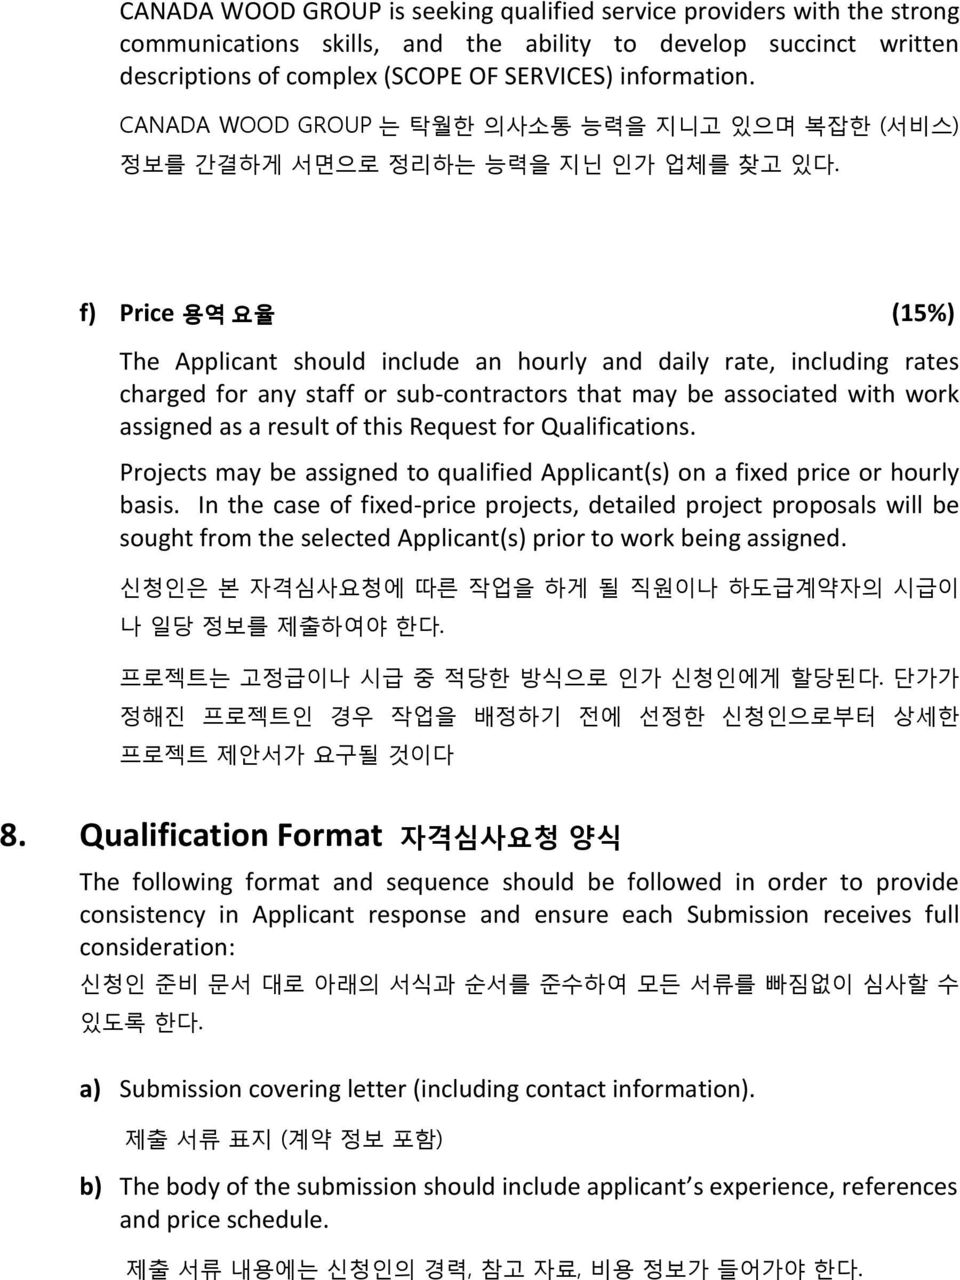 f) Price 용역 요율 (15%) The Applicant should include an hourly and daily rate, including rates charged for any staff or sub-contractors that may be associated with work assigned as a result of this